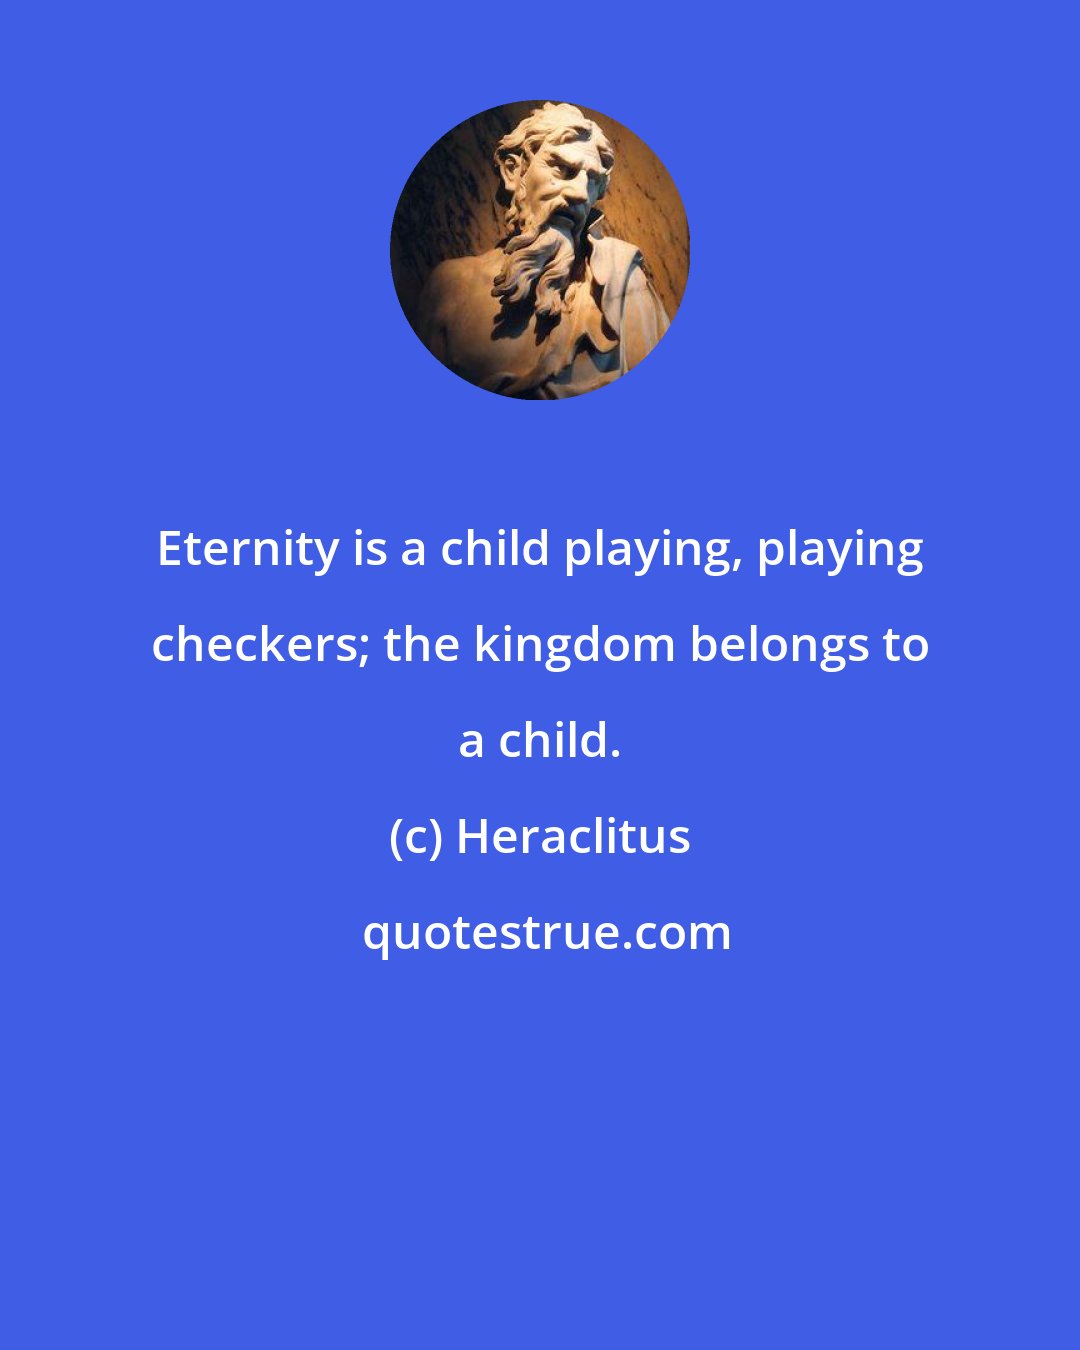 Heraclitus: Eternity is a child playing, playing checkers; the kingdom belongs to a child.